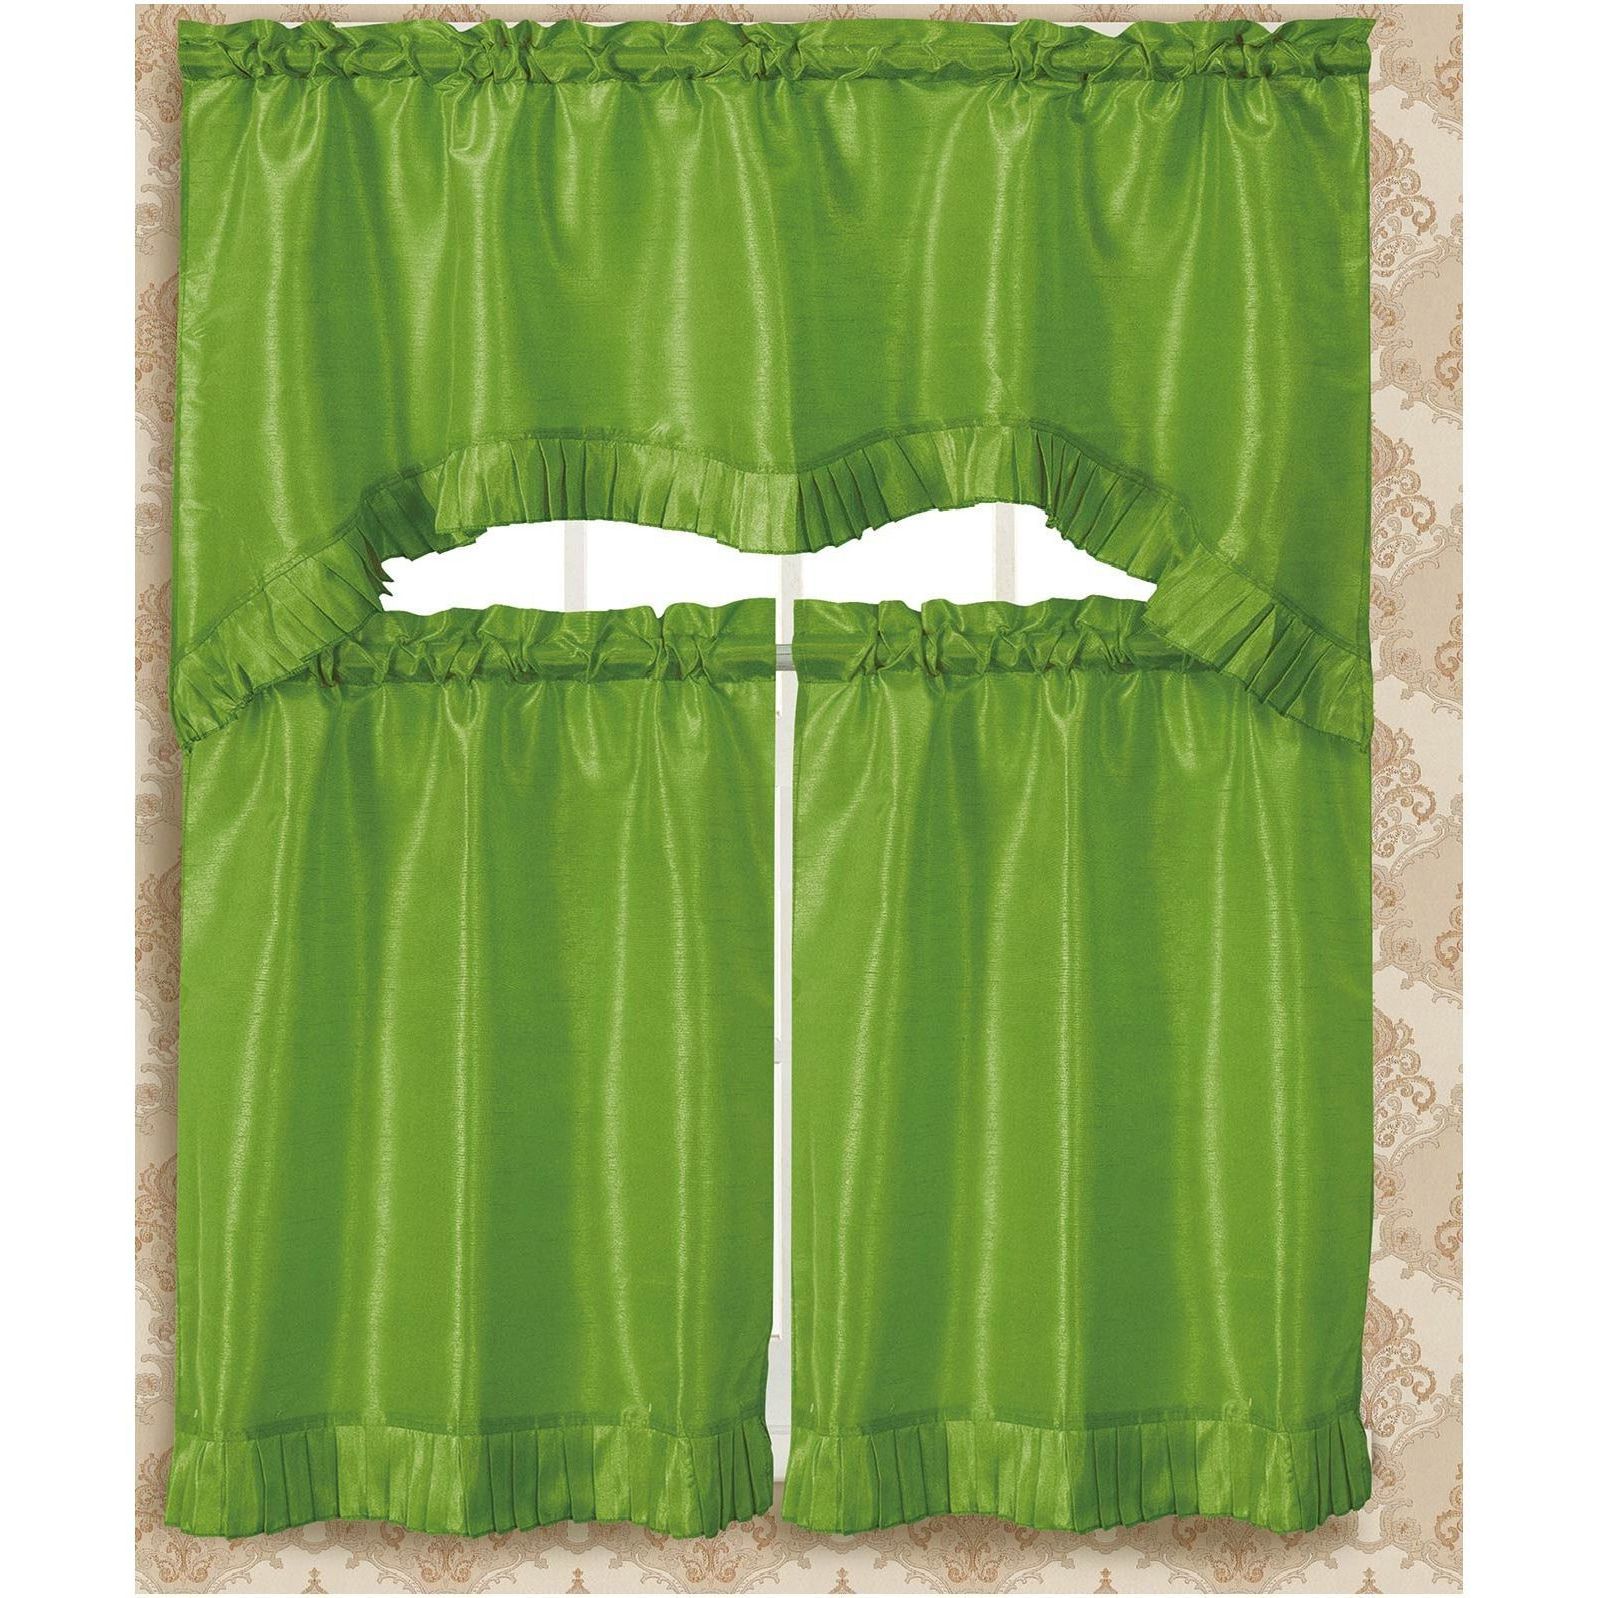 Rt Designers Collection Bermuda Ruffle Kitchen Curtain Tier Within Recent Bermuda Ruffle Kitchen Curtain Tier Sets (View 5 of 20)